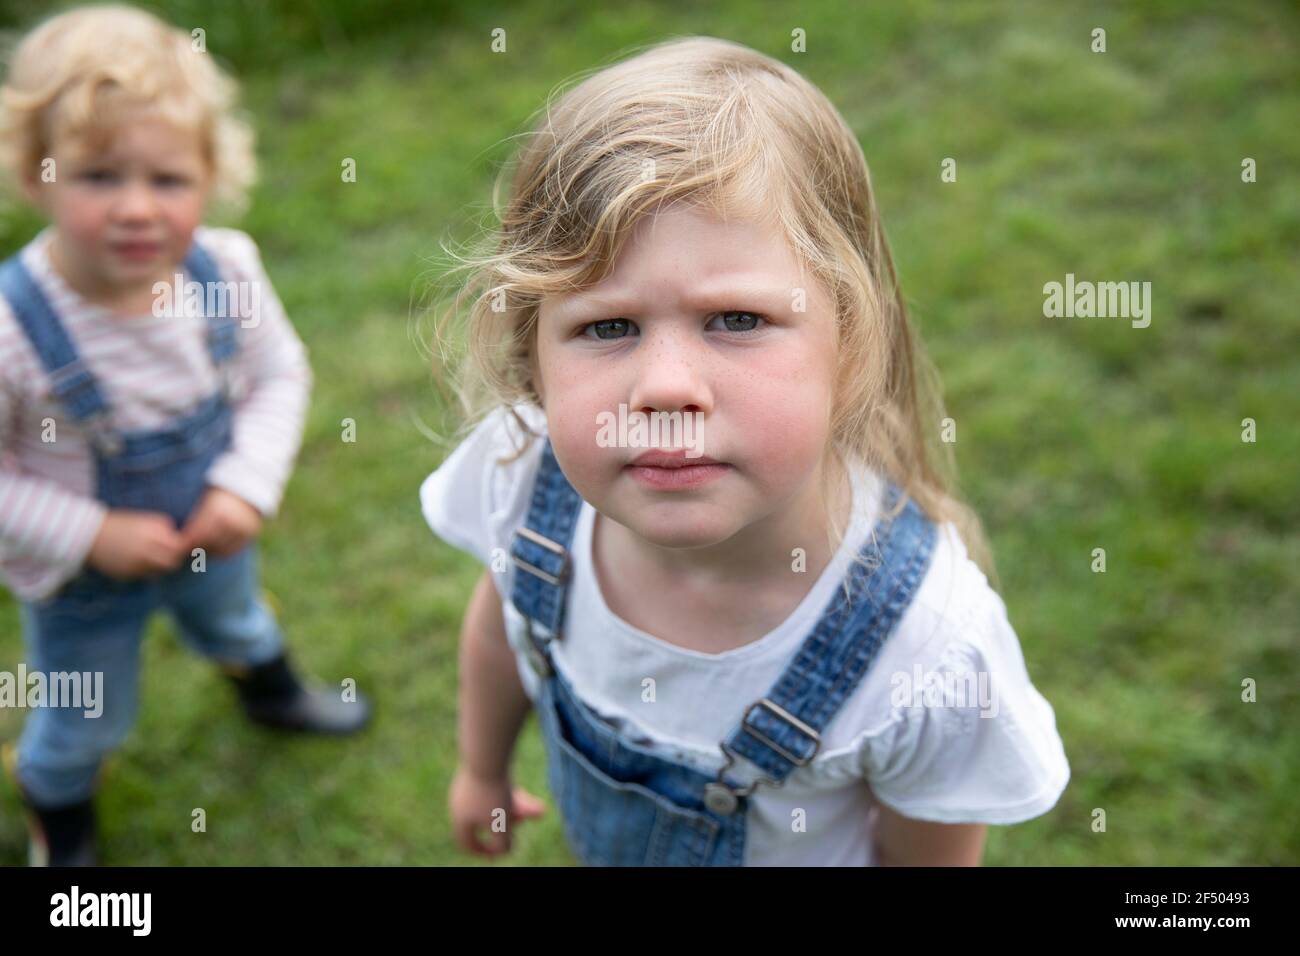 Portrait serious blonde girl in overalls with sister Stock Photo